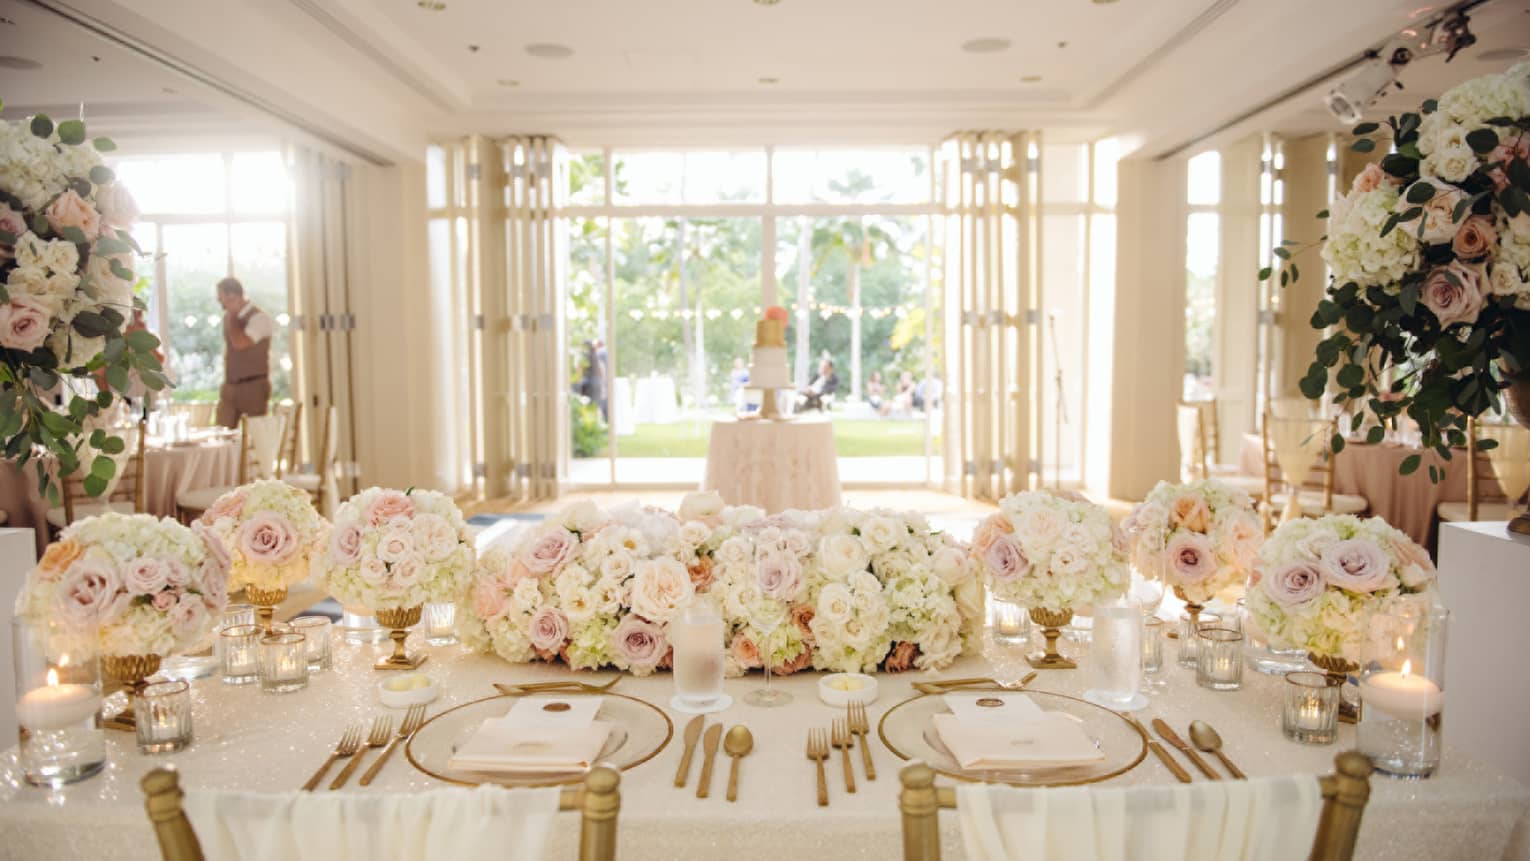 Elegant white and gold wedding banquet table setting with pink-and-white roses centrepiece